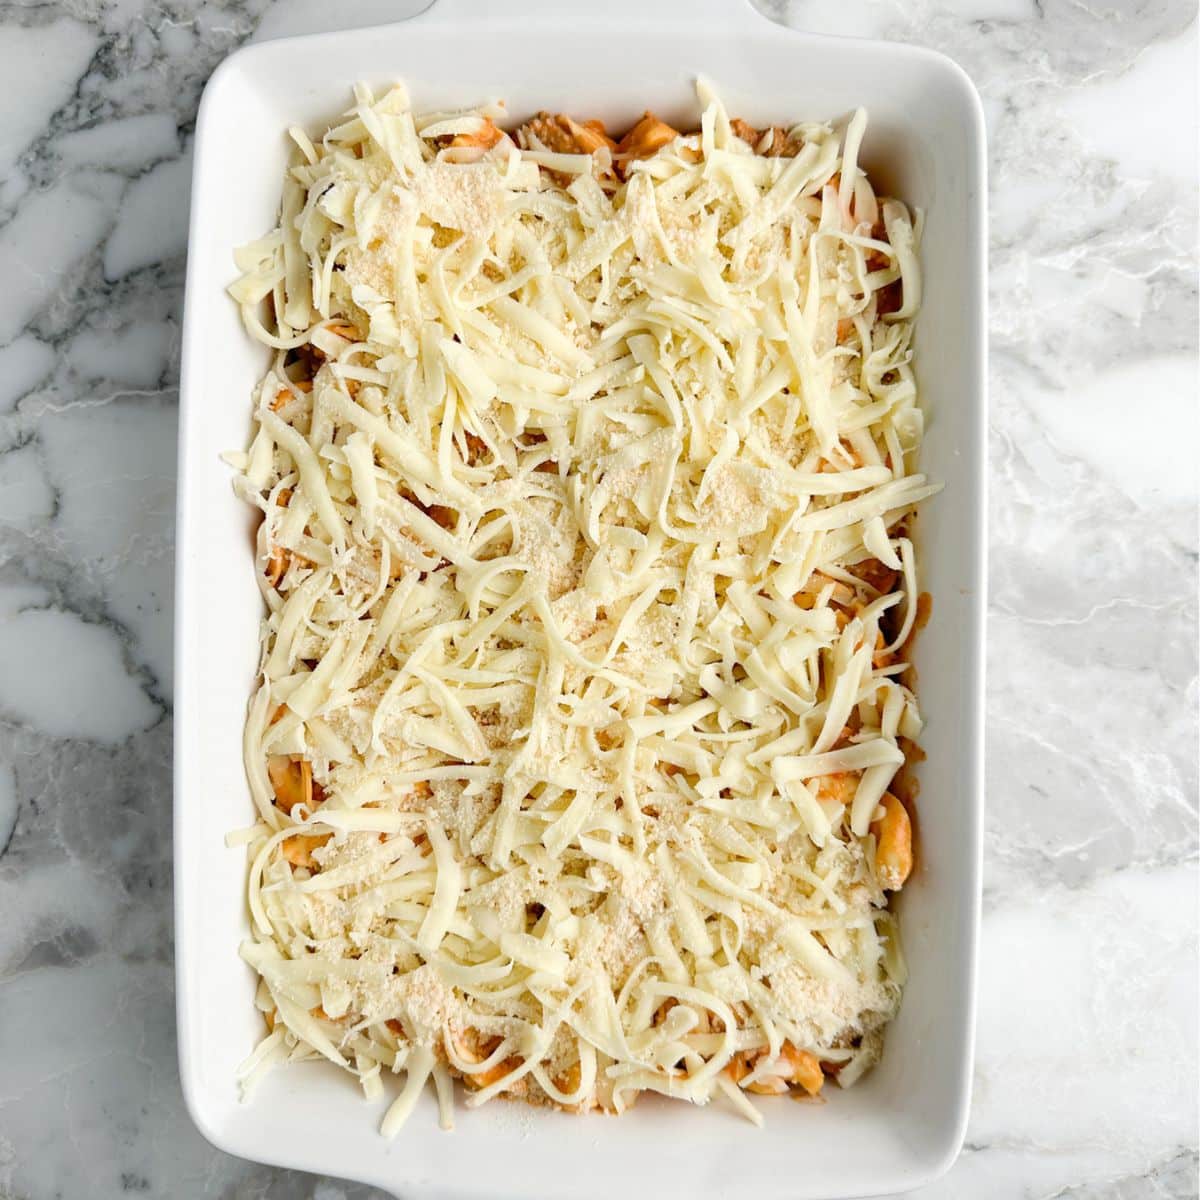 Shredded cheese on casserole in a baking dish.